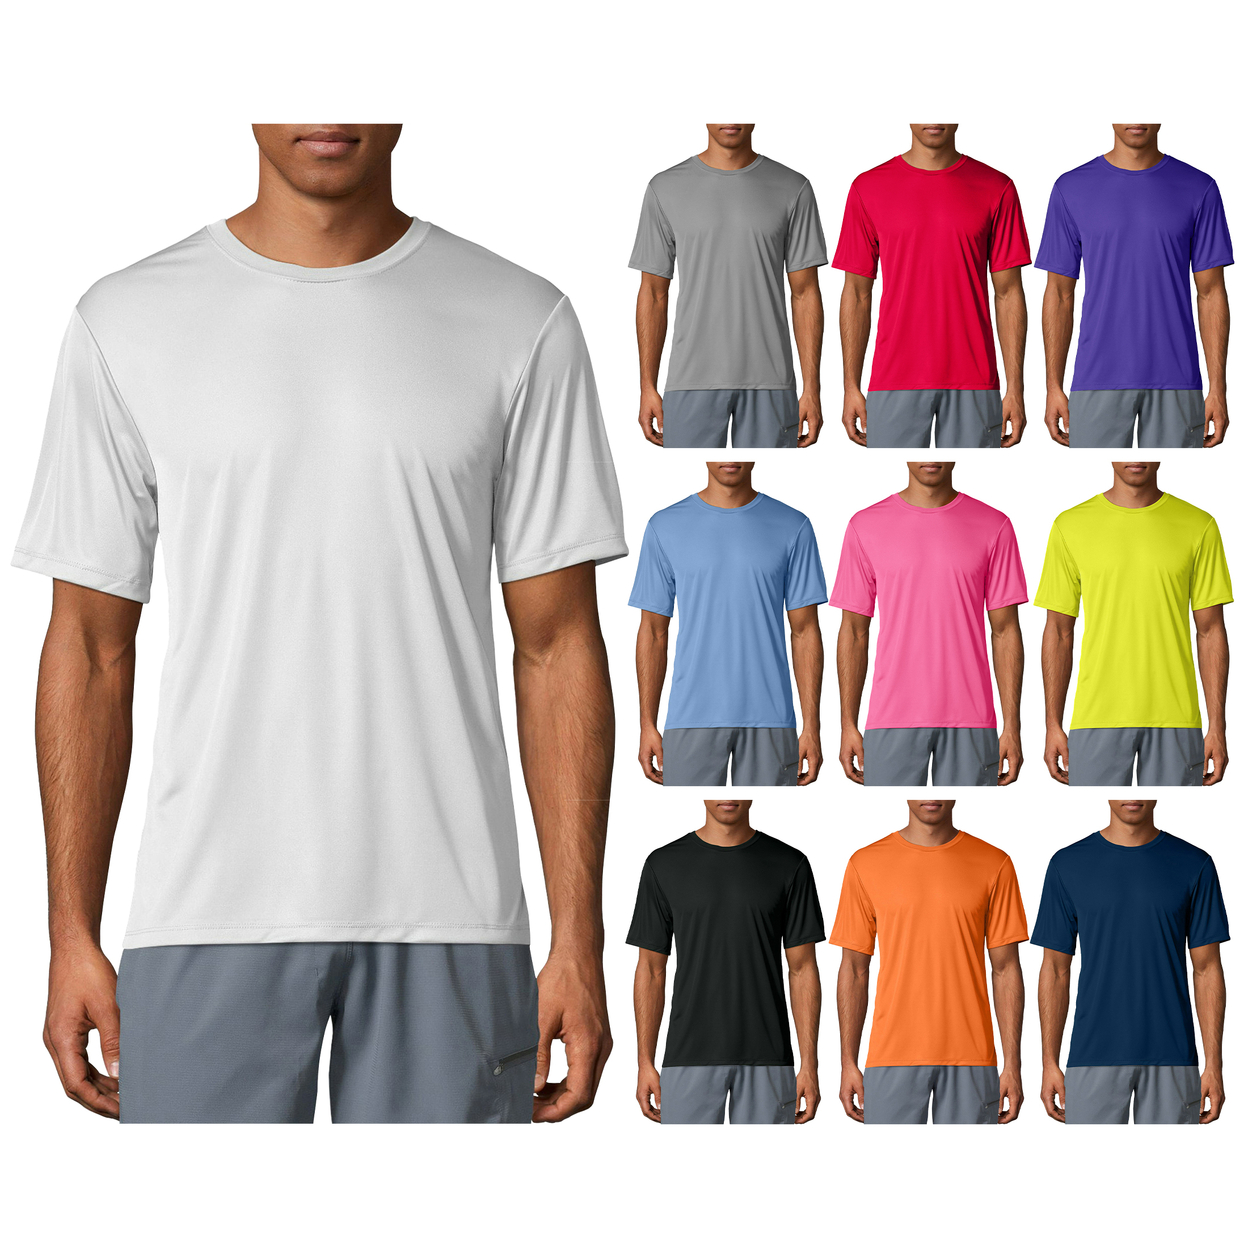 3-Pack: Men's Moisture Wicking Cool Dri-Fit Performance Short Sleeve Crew Neck T-Shirts - Small